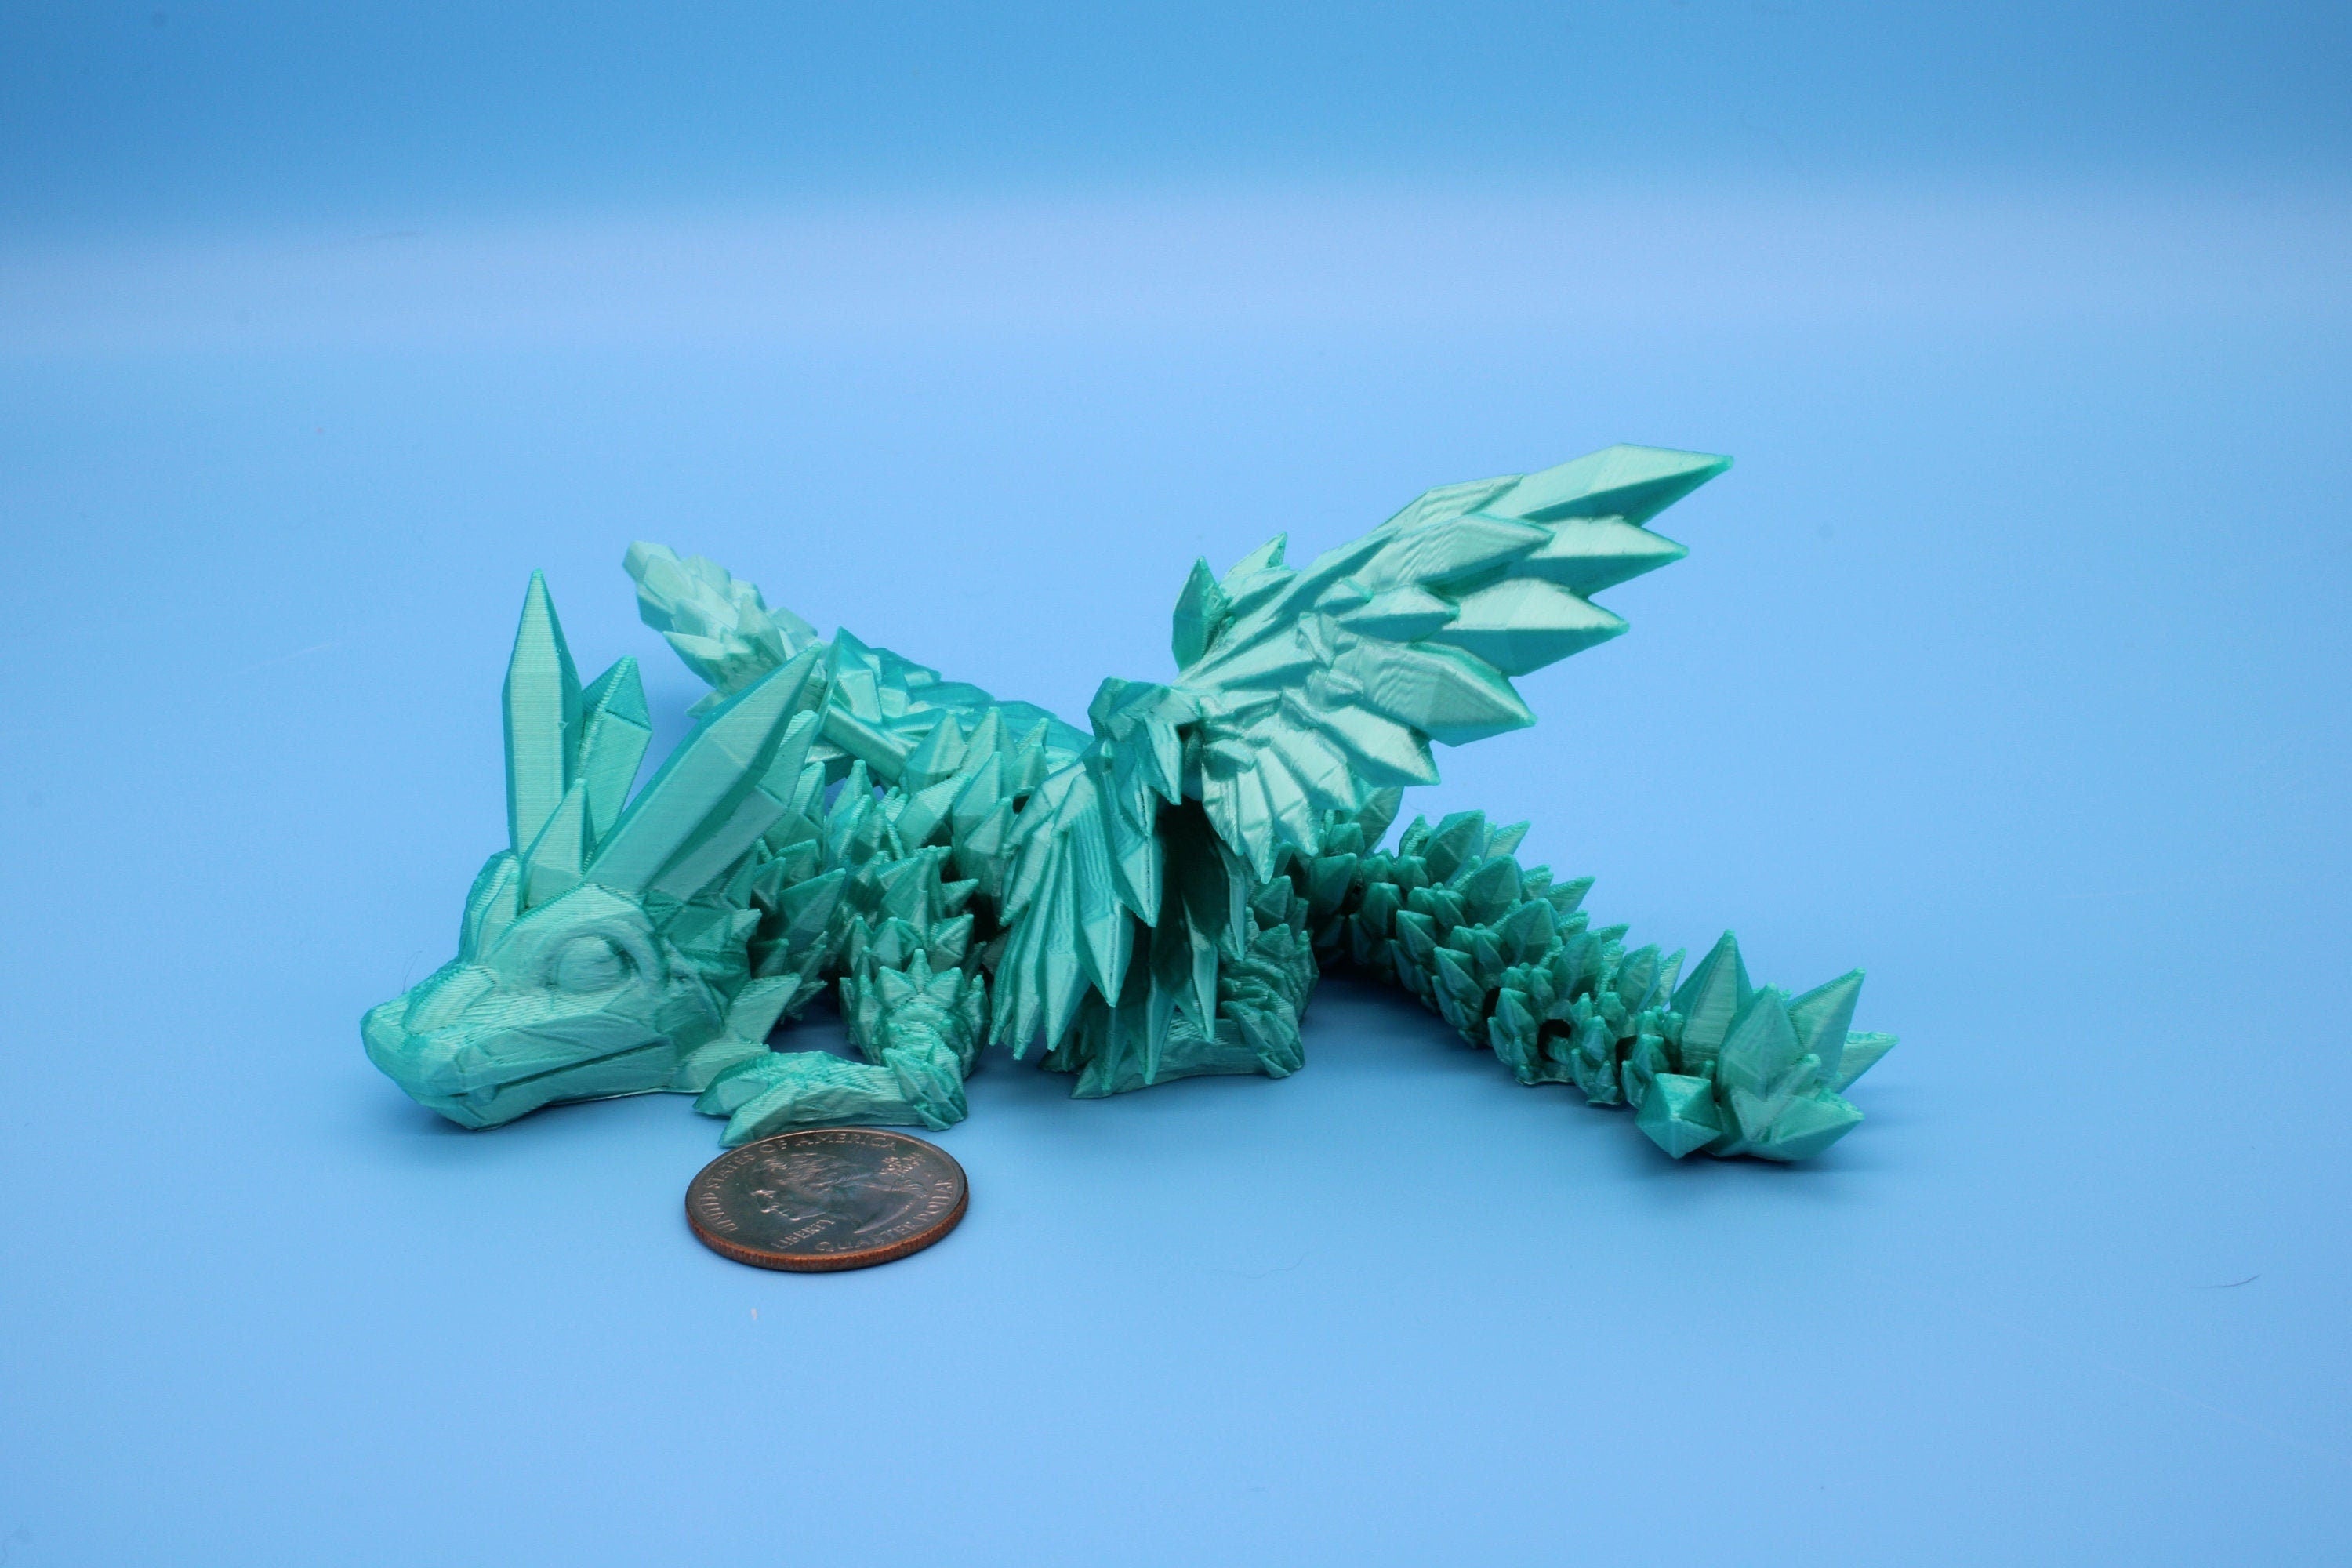 Miniature Teal Crystal Winged Dragon | 3D printed articulating dragon Fidget | Flexi Toy 7 in. head to tail | Stress Relief Gift